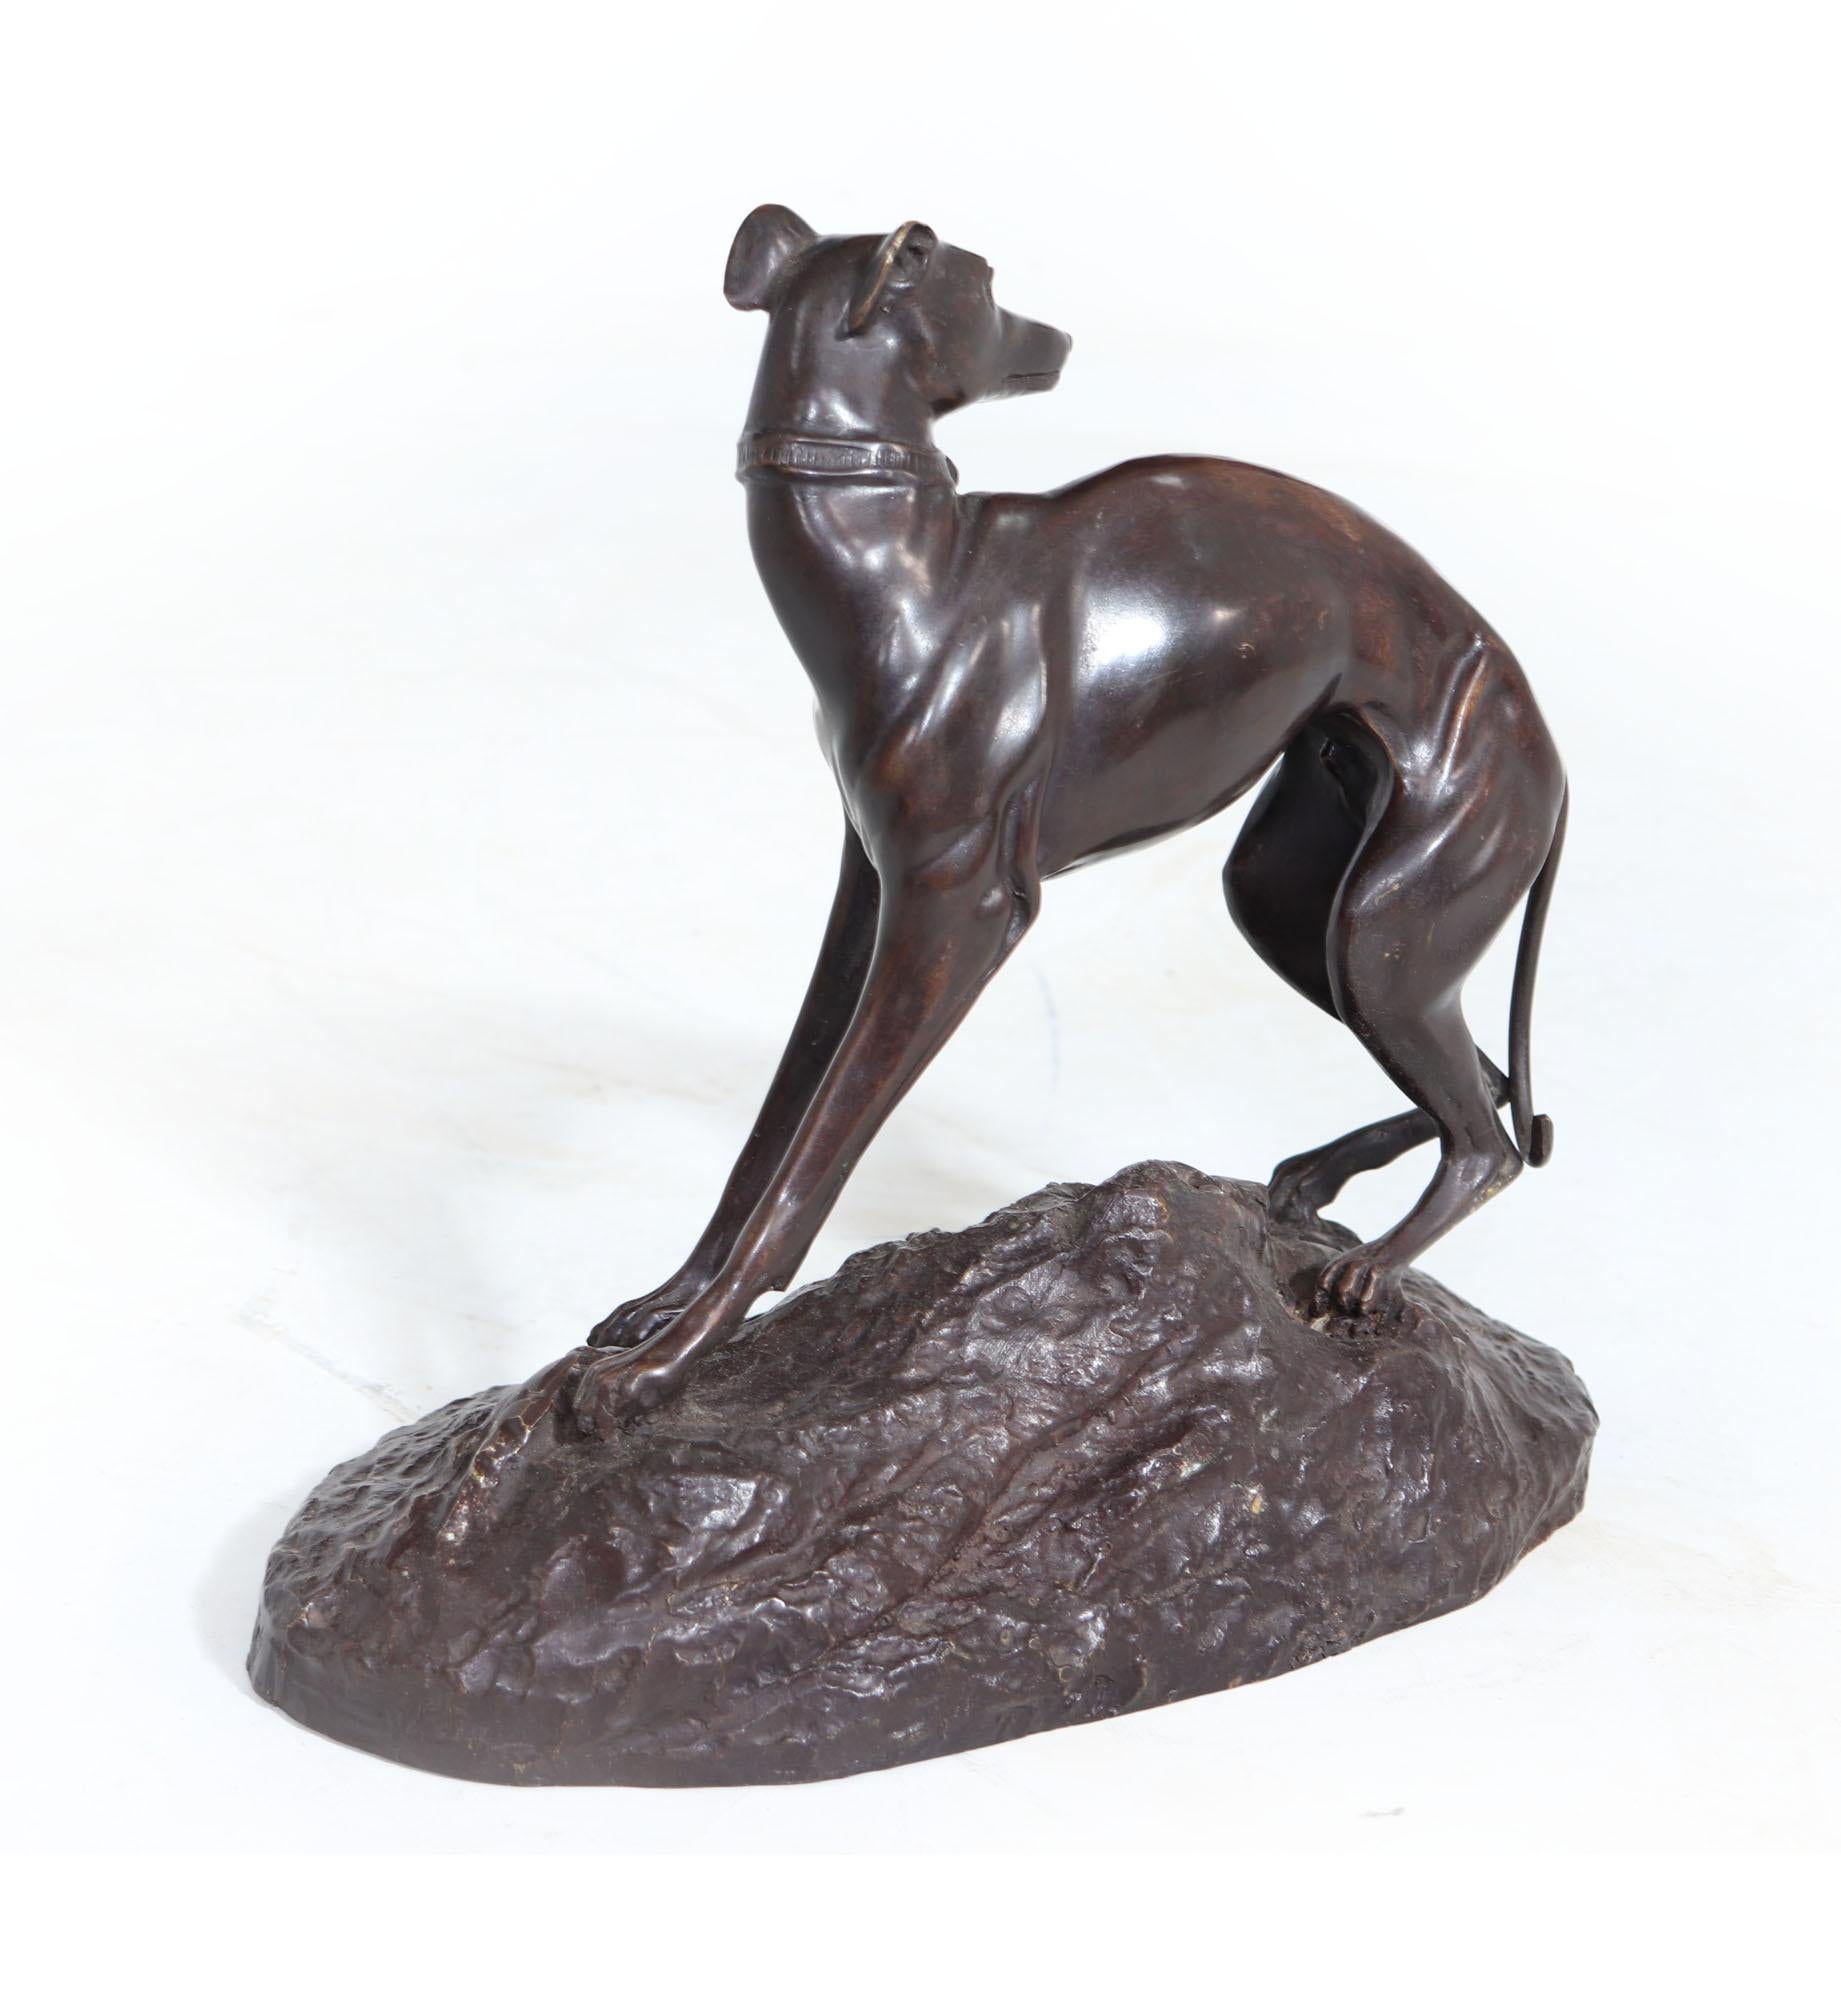 A French bronze sculpture of a whippet created by Jean Francois Getcher (1976 - 1844). The Whippet has great form with good muscle definition wearing a collar with his head turned back, standing on a rocky mound that is inscribed with the artist